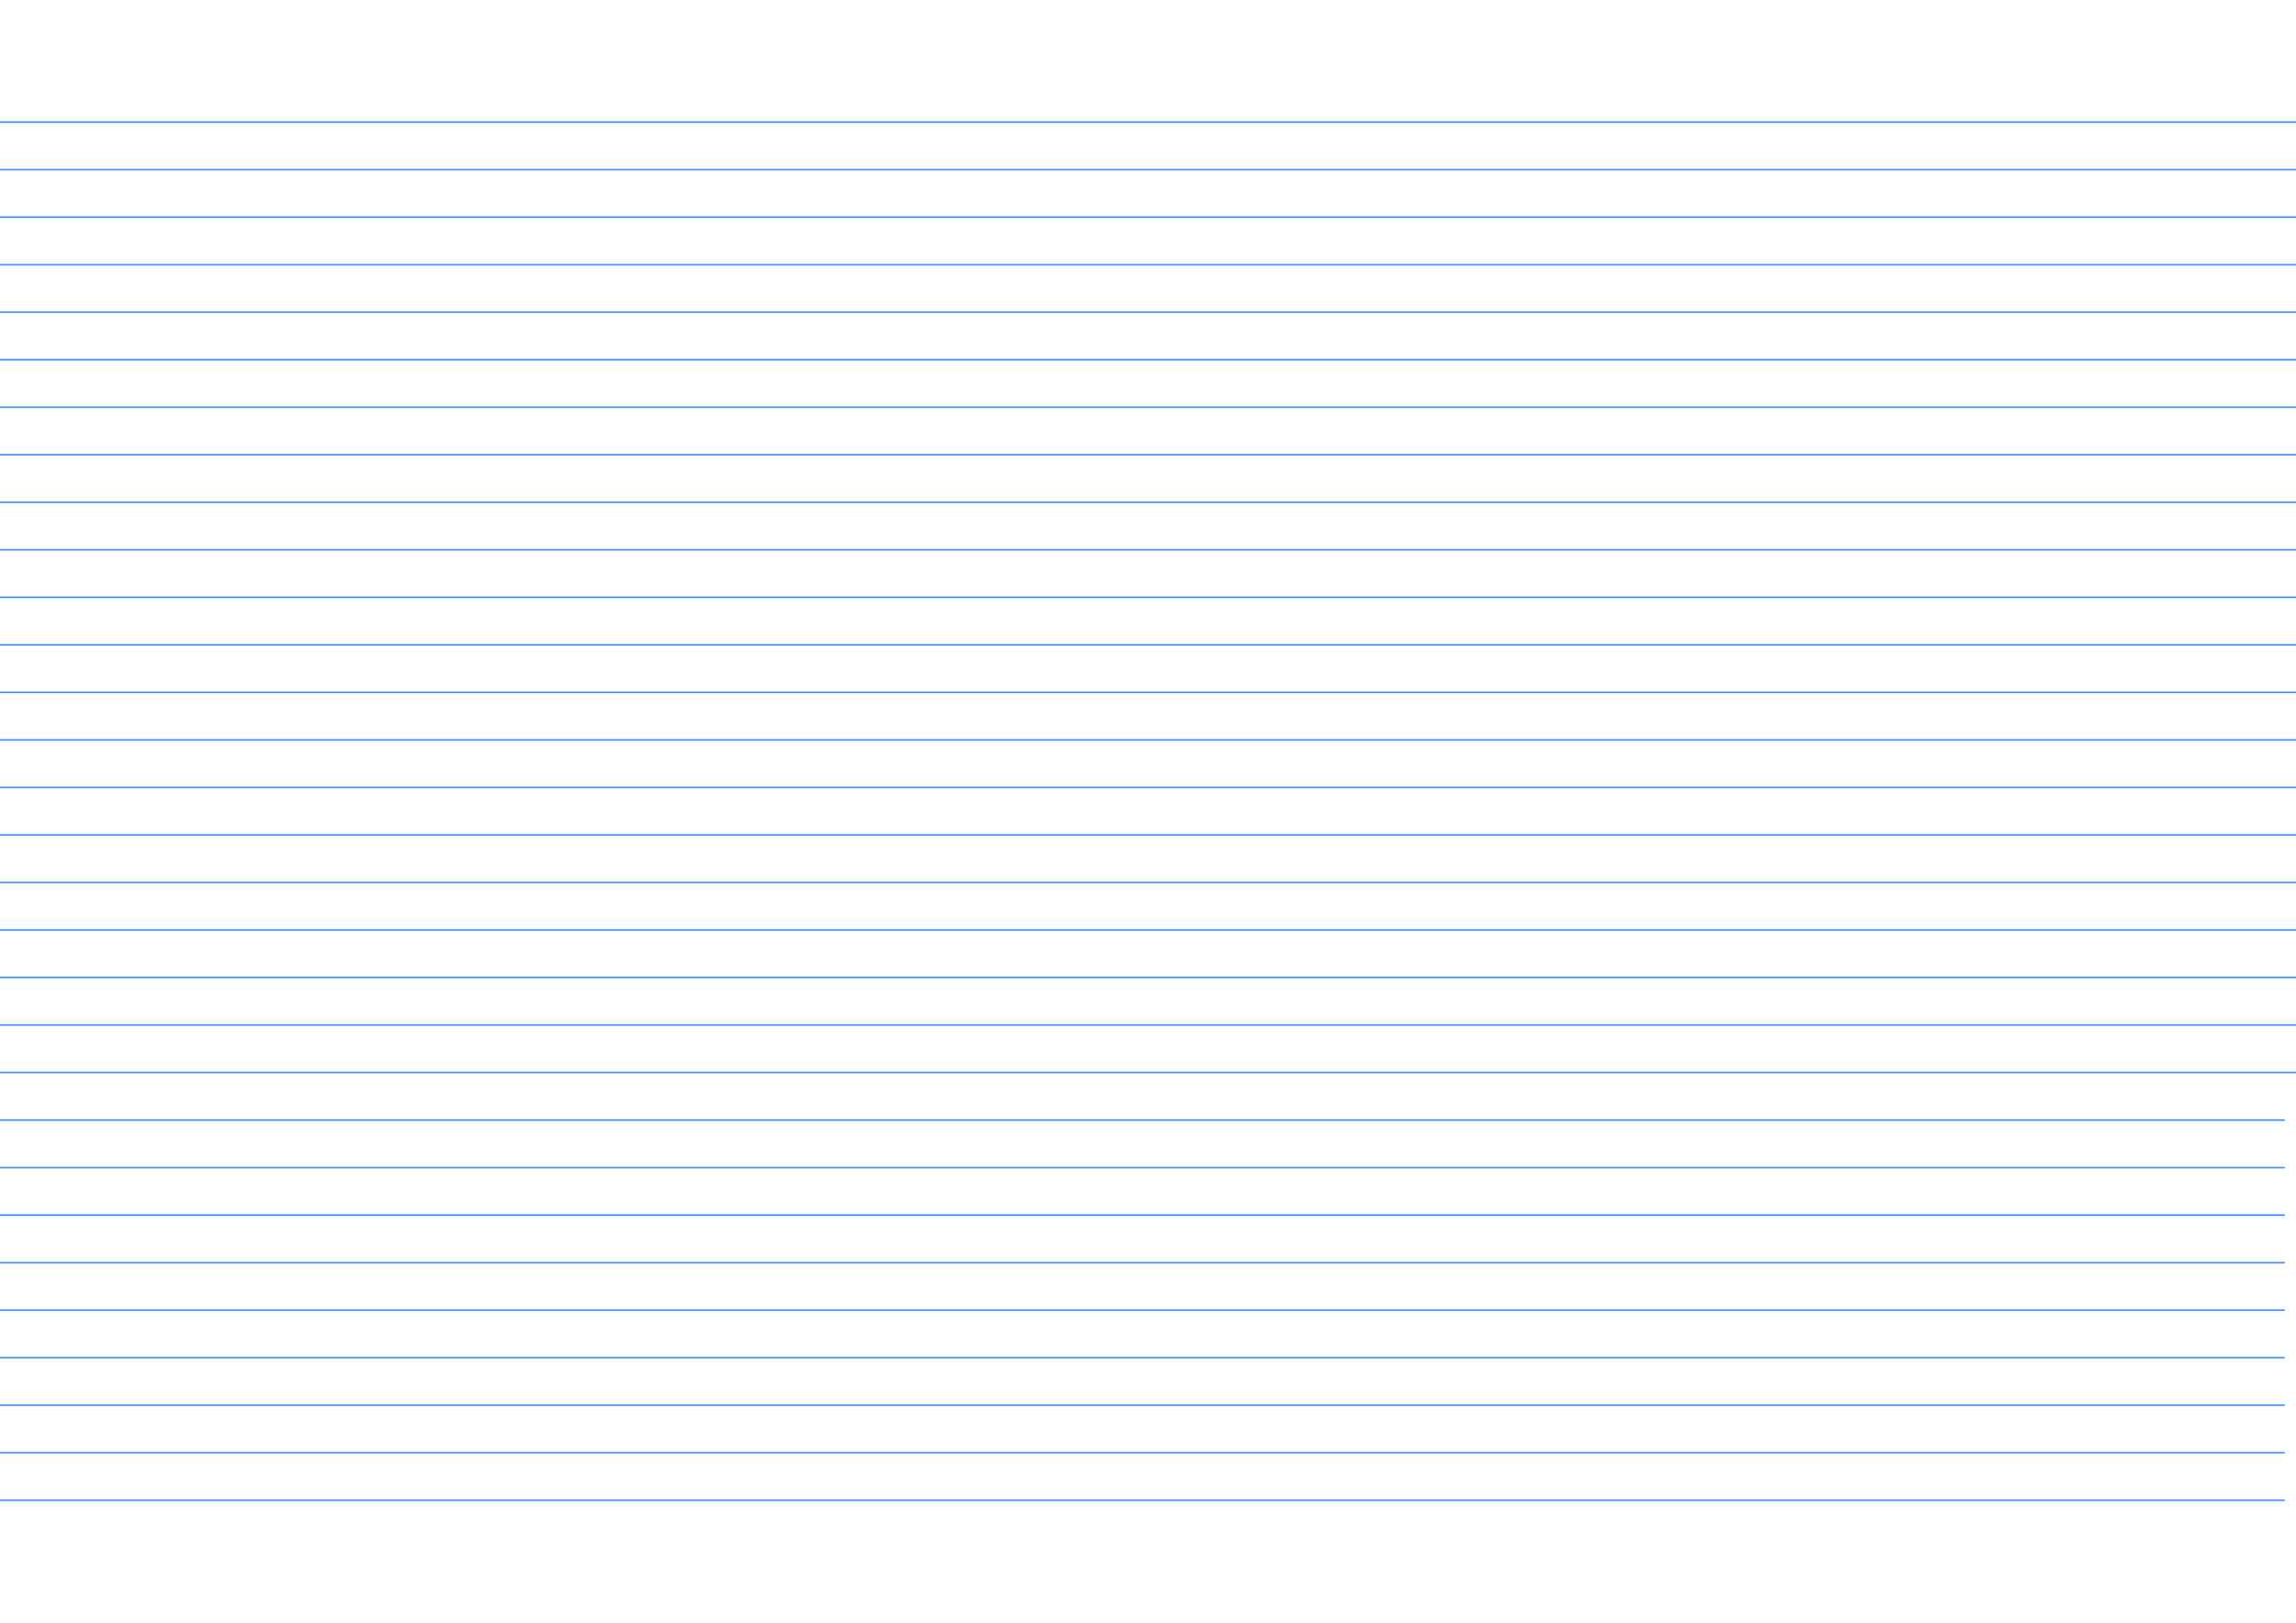 Notebook Paper Template For Word - Calep.midnightpig.co Within Notebook Paper Template For Word 2010